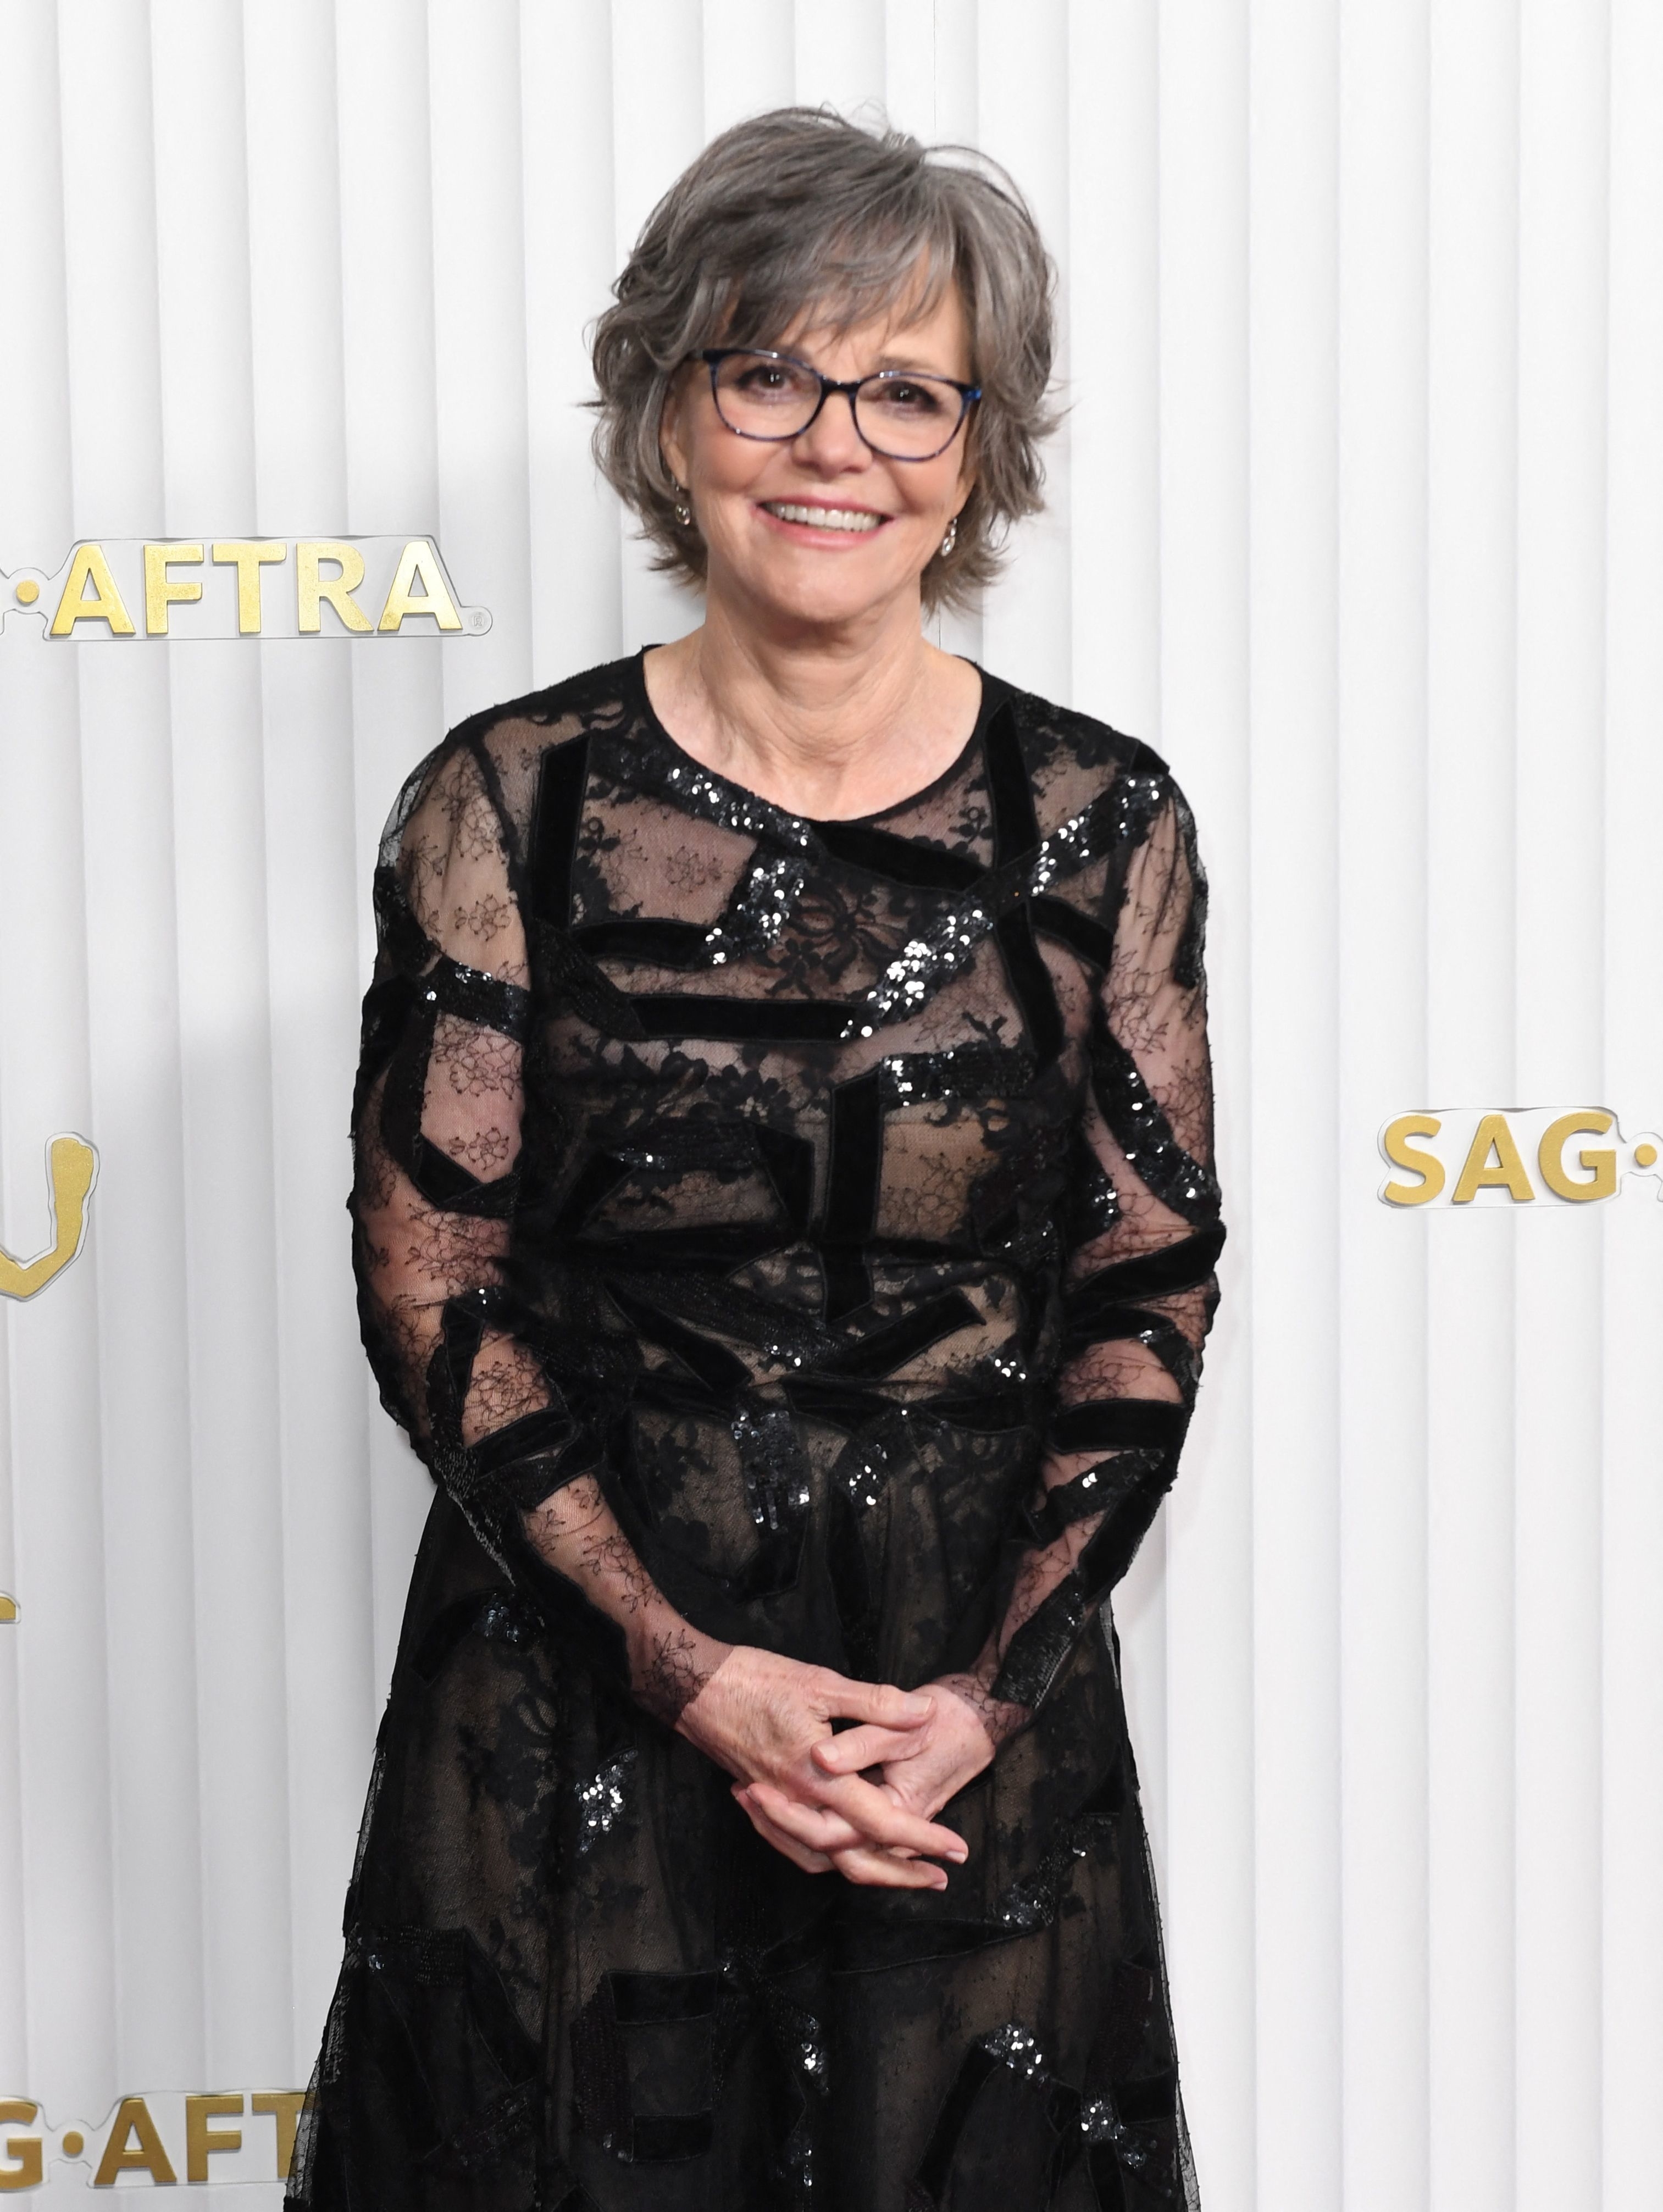 A person in an elegant black lace dress with sequin details posing at the SAG-AFTRA event